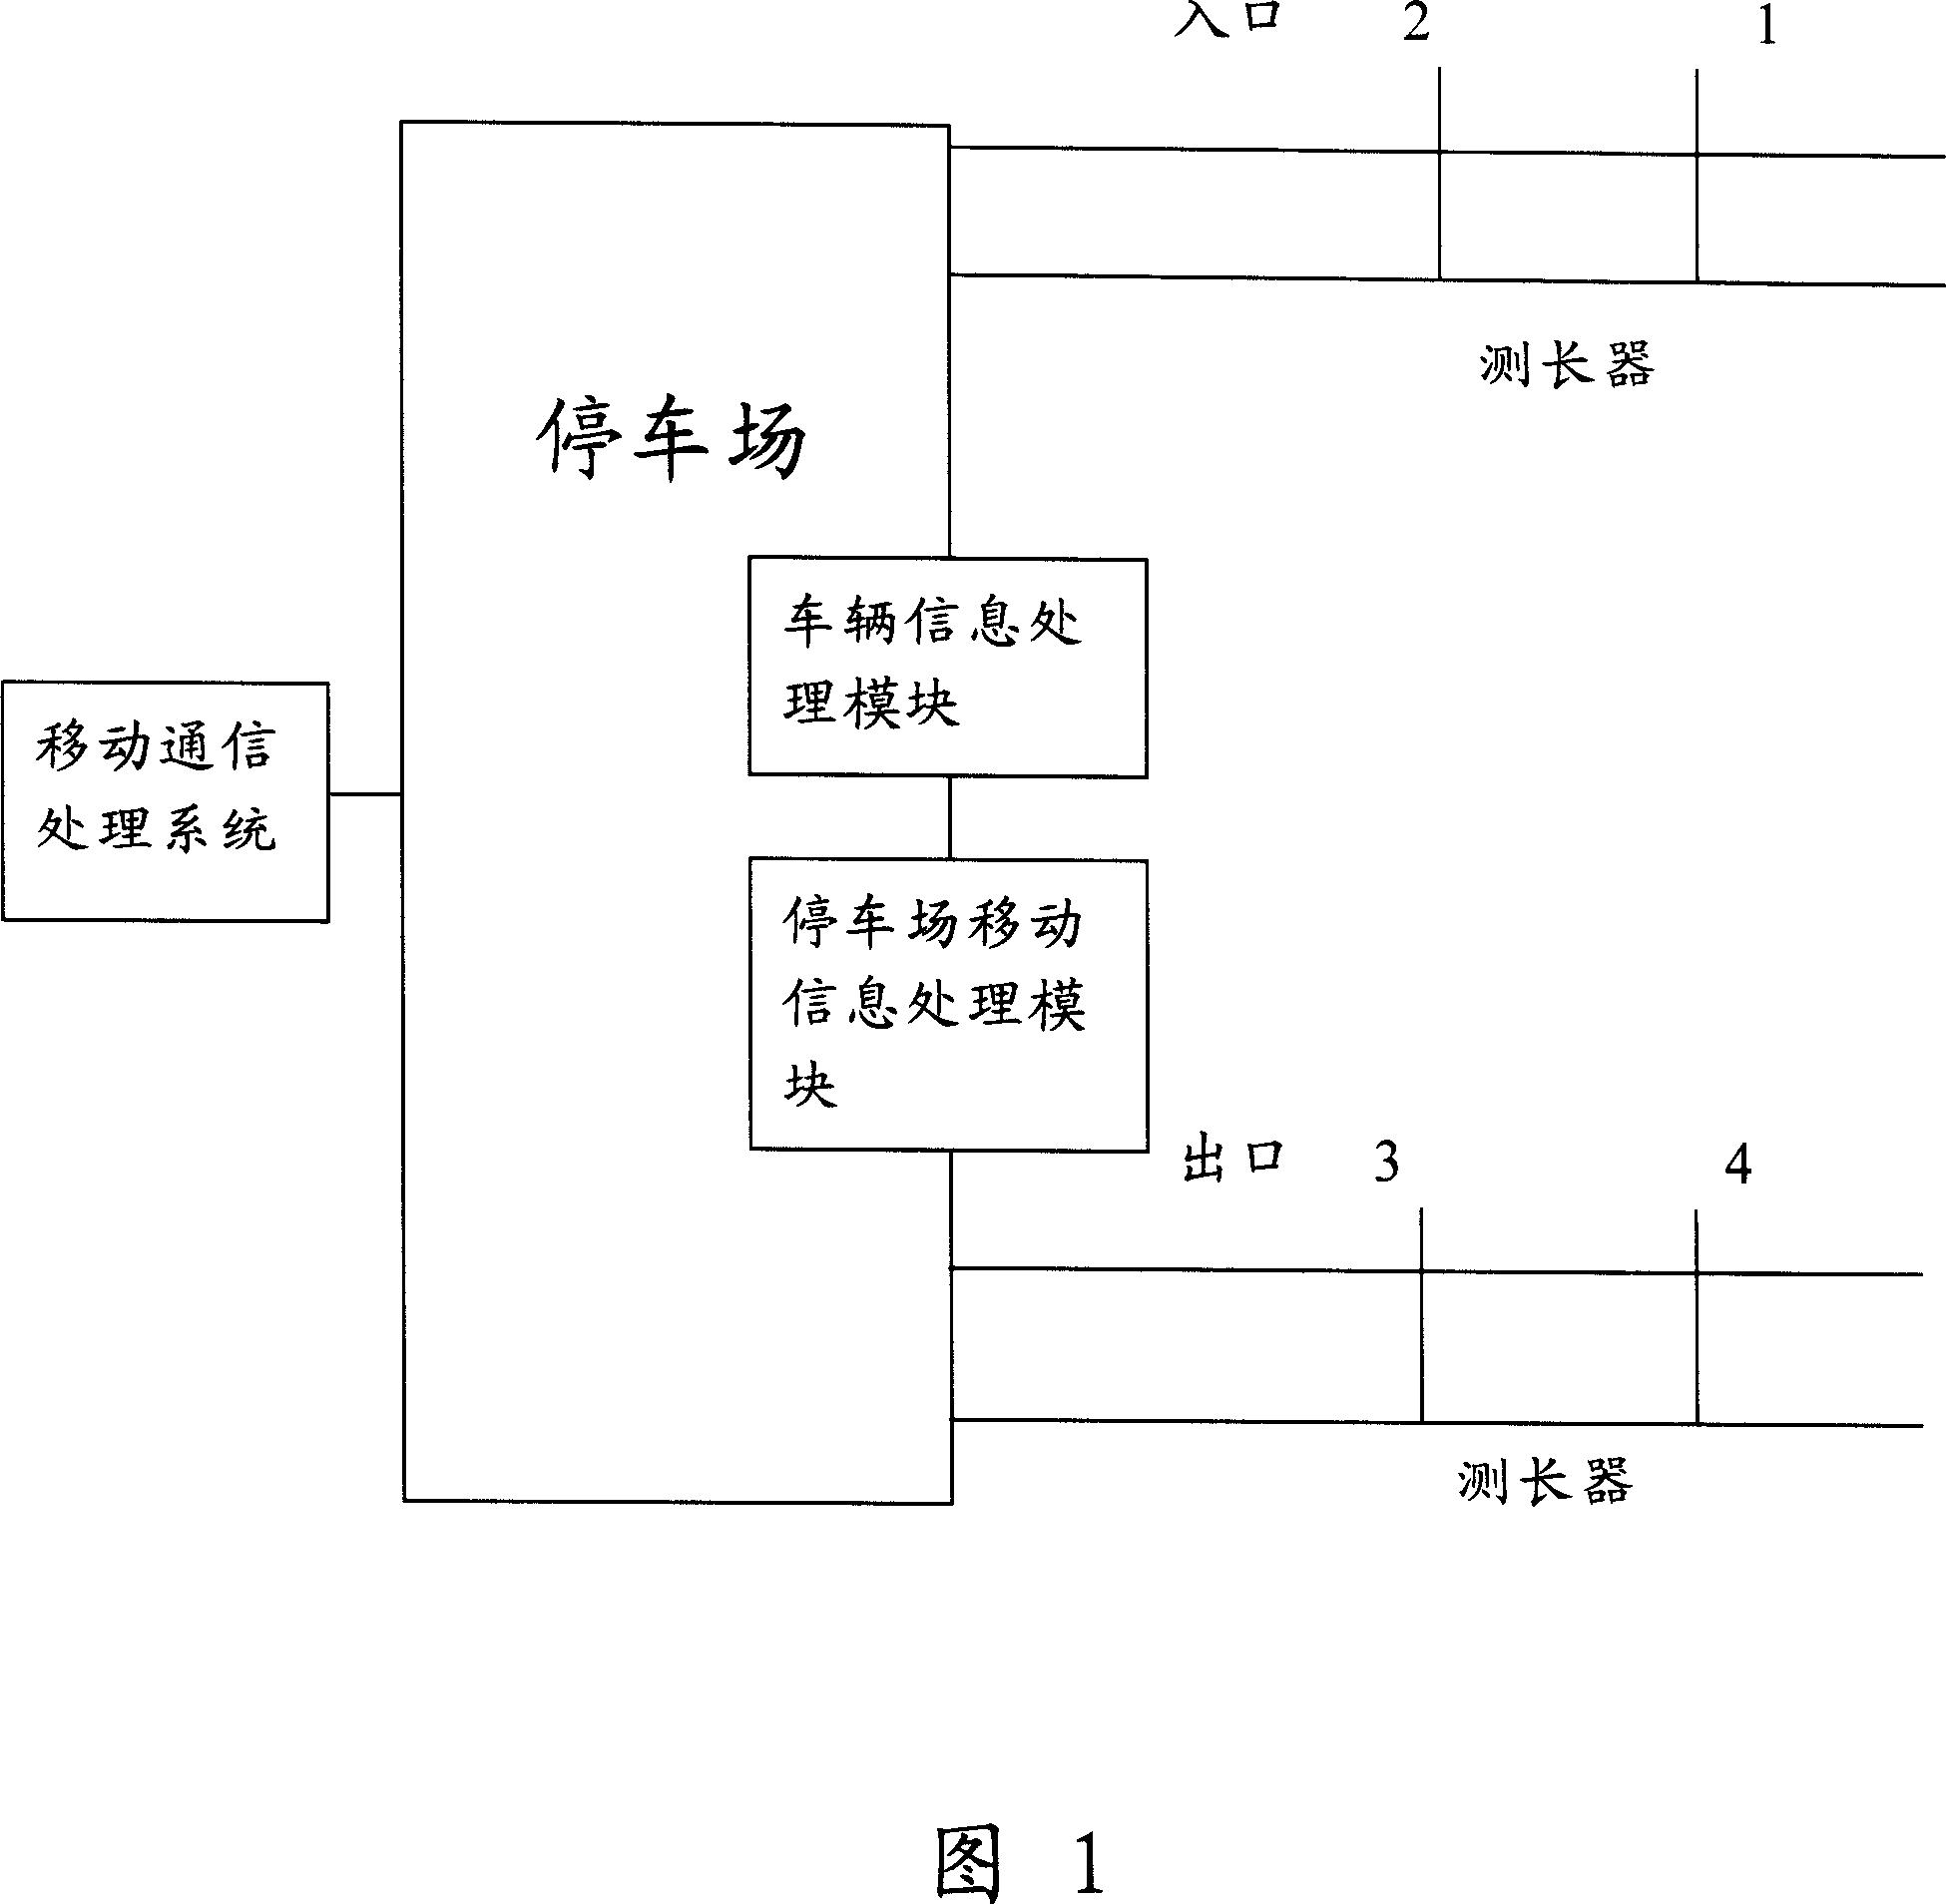 Method and system for automatically charging in car park by mobile terminal